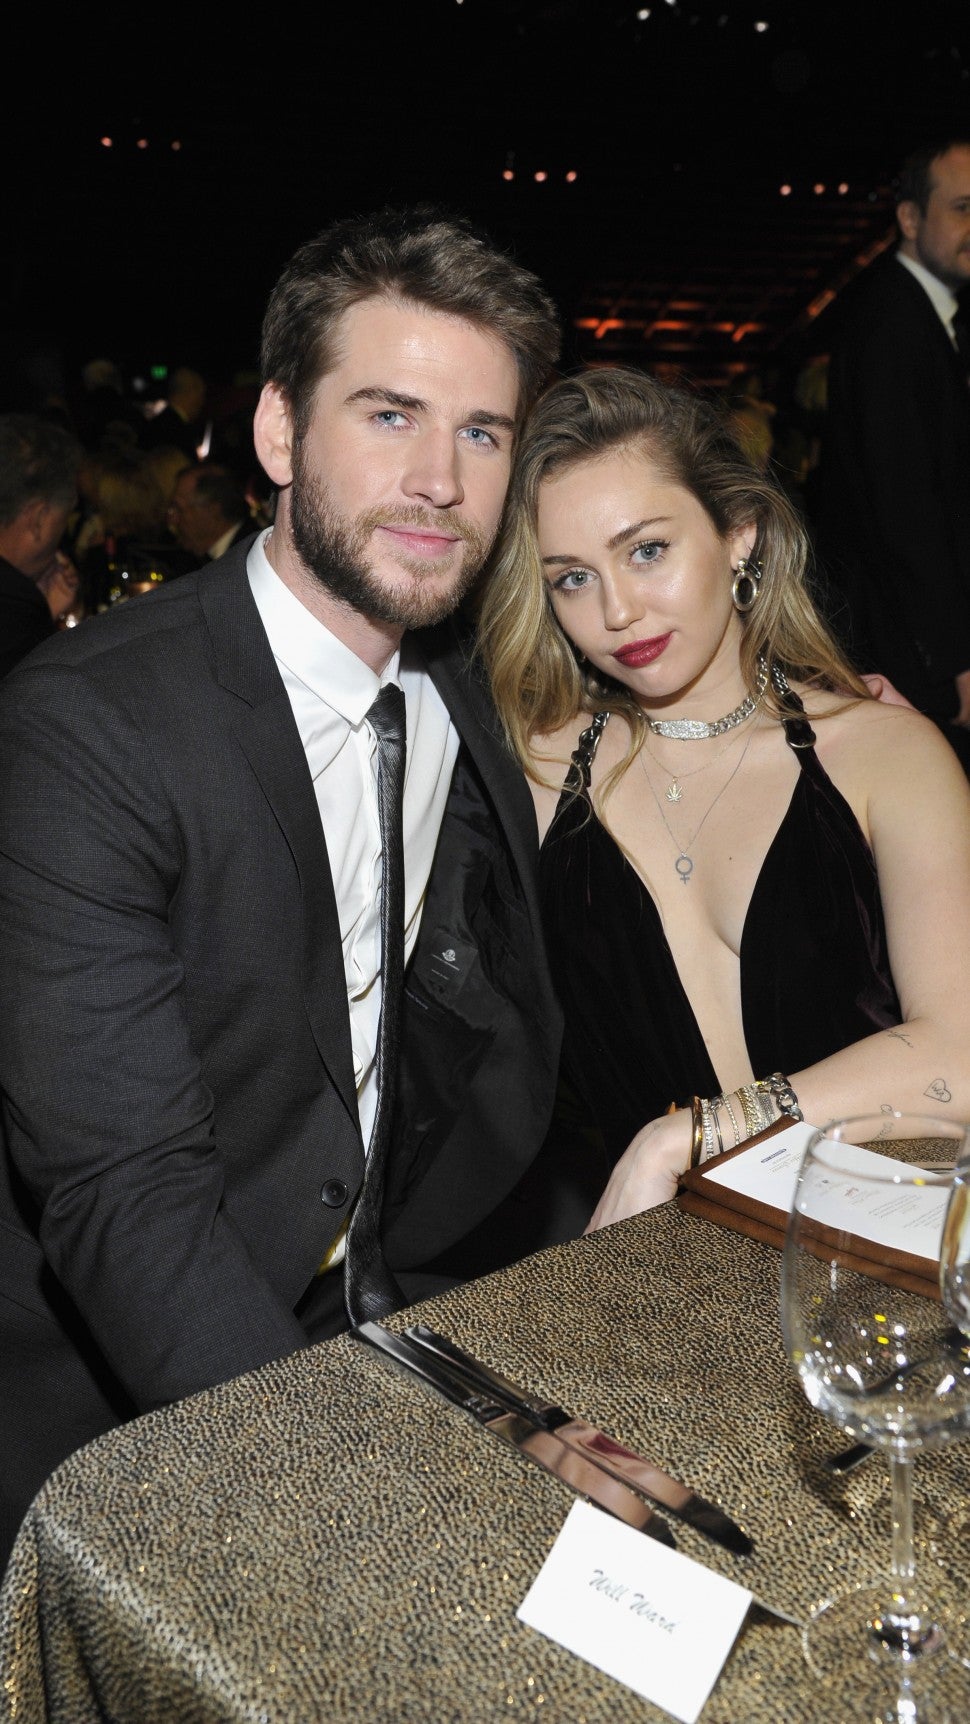 Liam Hemsworth and Miley Cyrus attend the 2019 G'Day USA Gala at 3LABS on January 26, 2019 in Culver City, California.